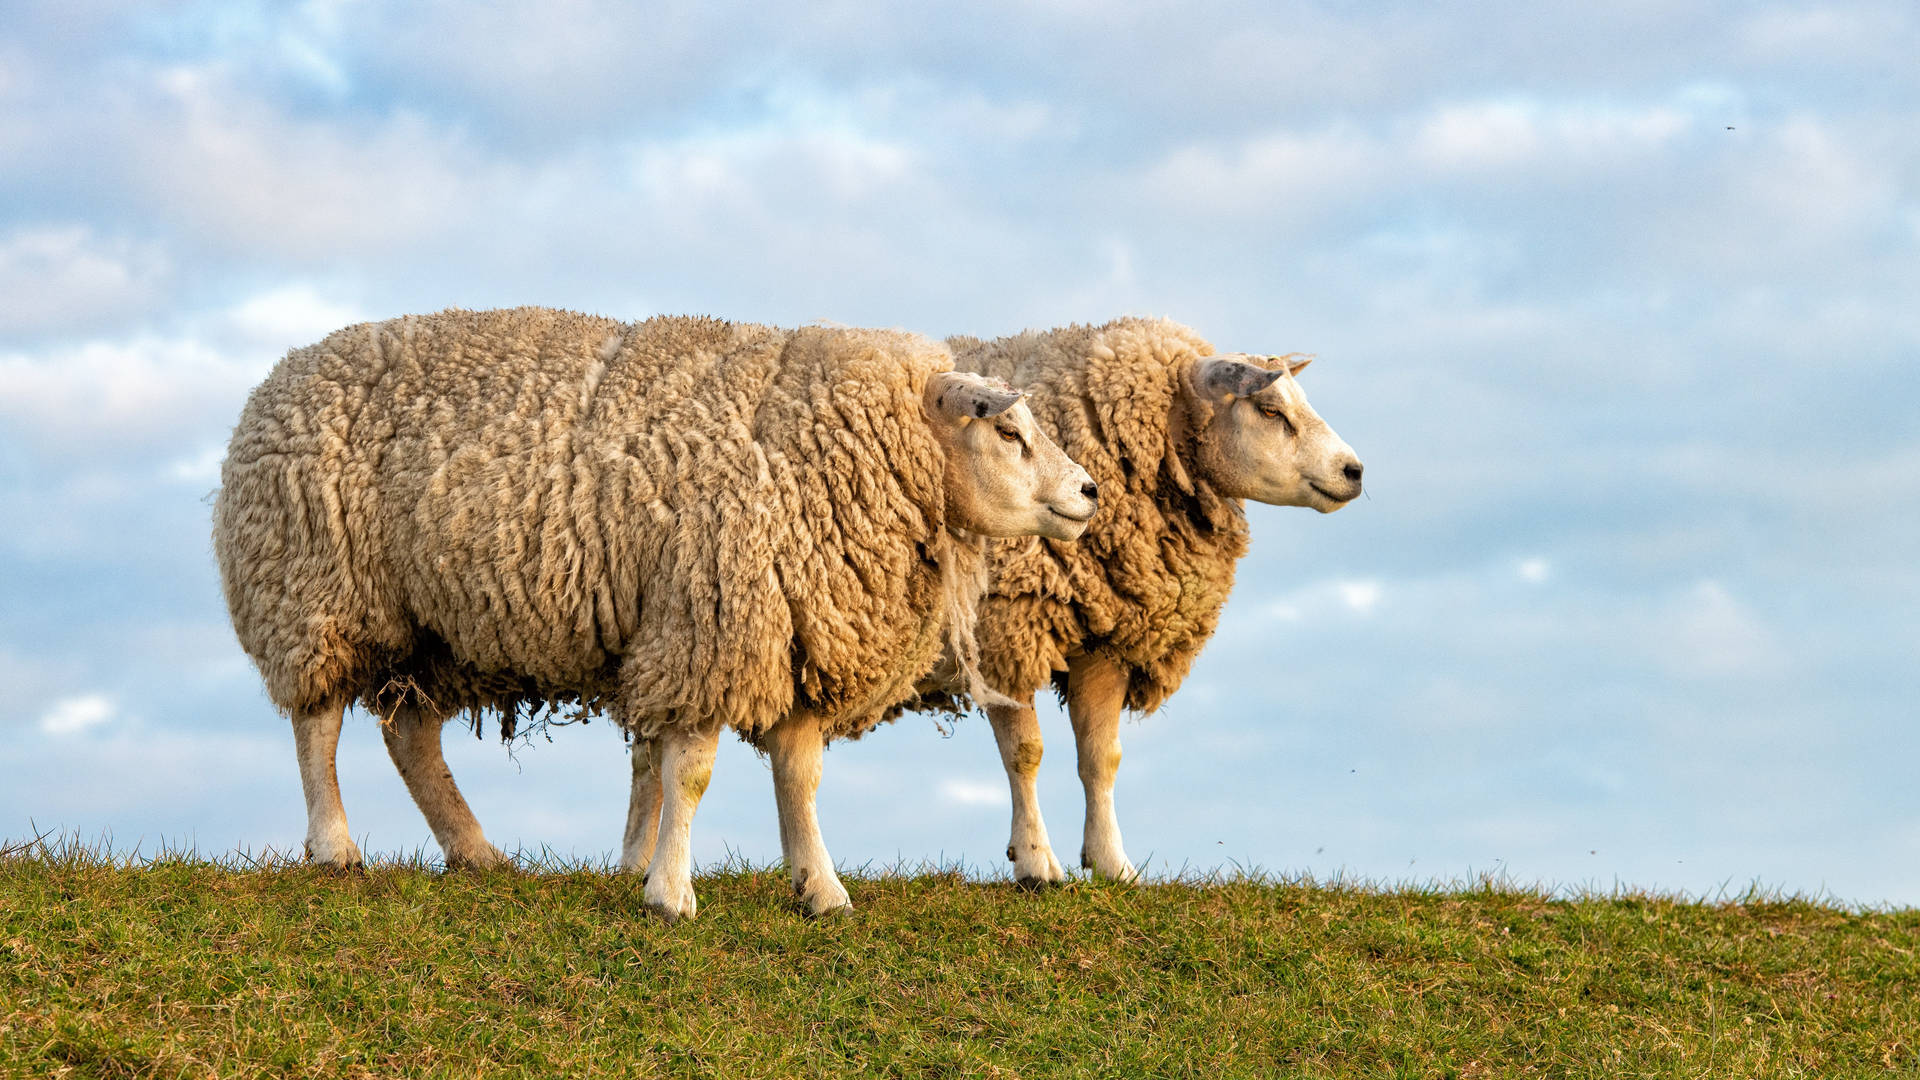 Fluffy Sheep On The Grass Background